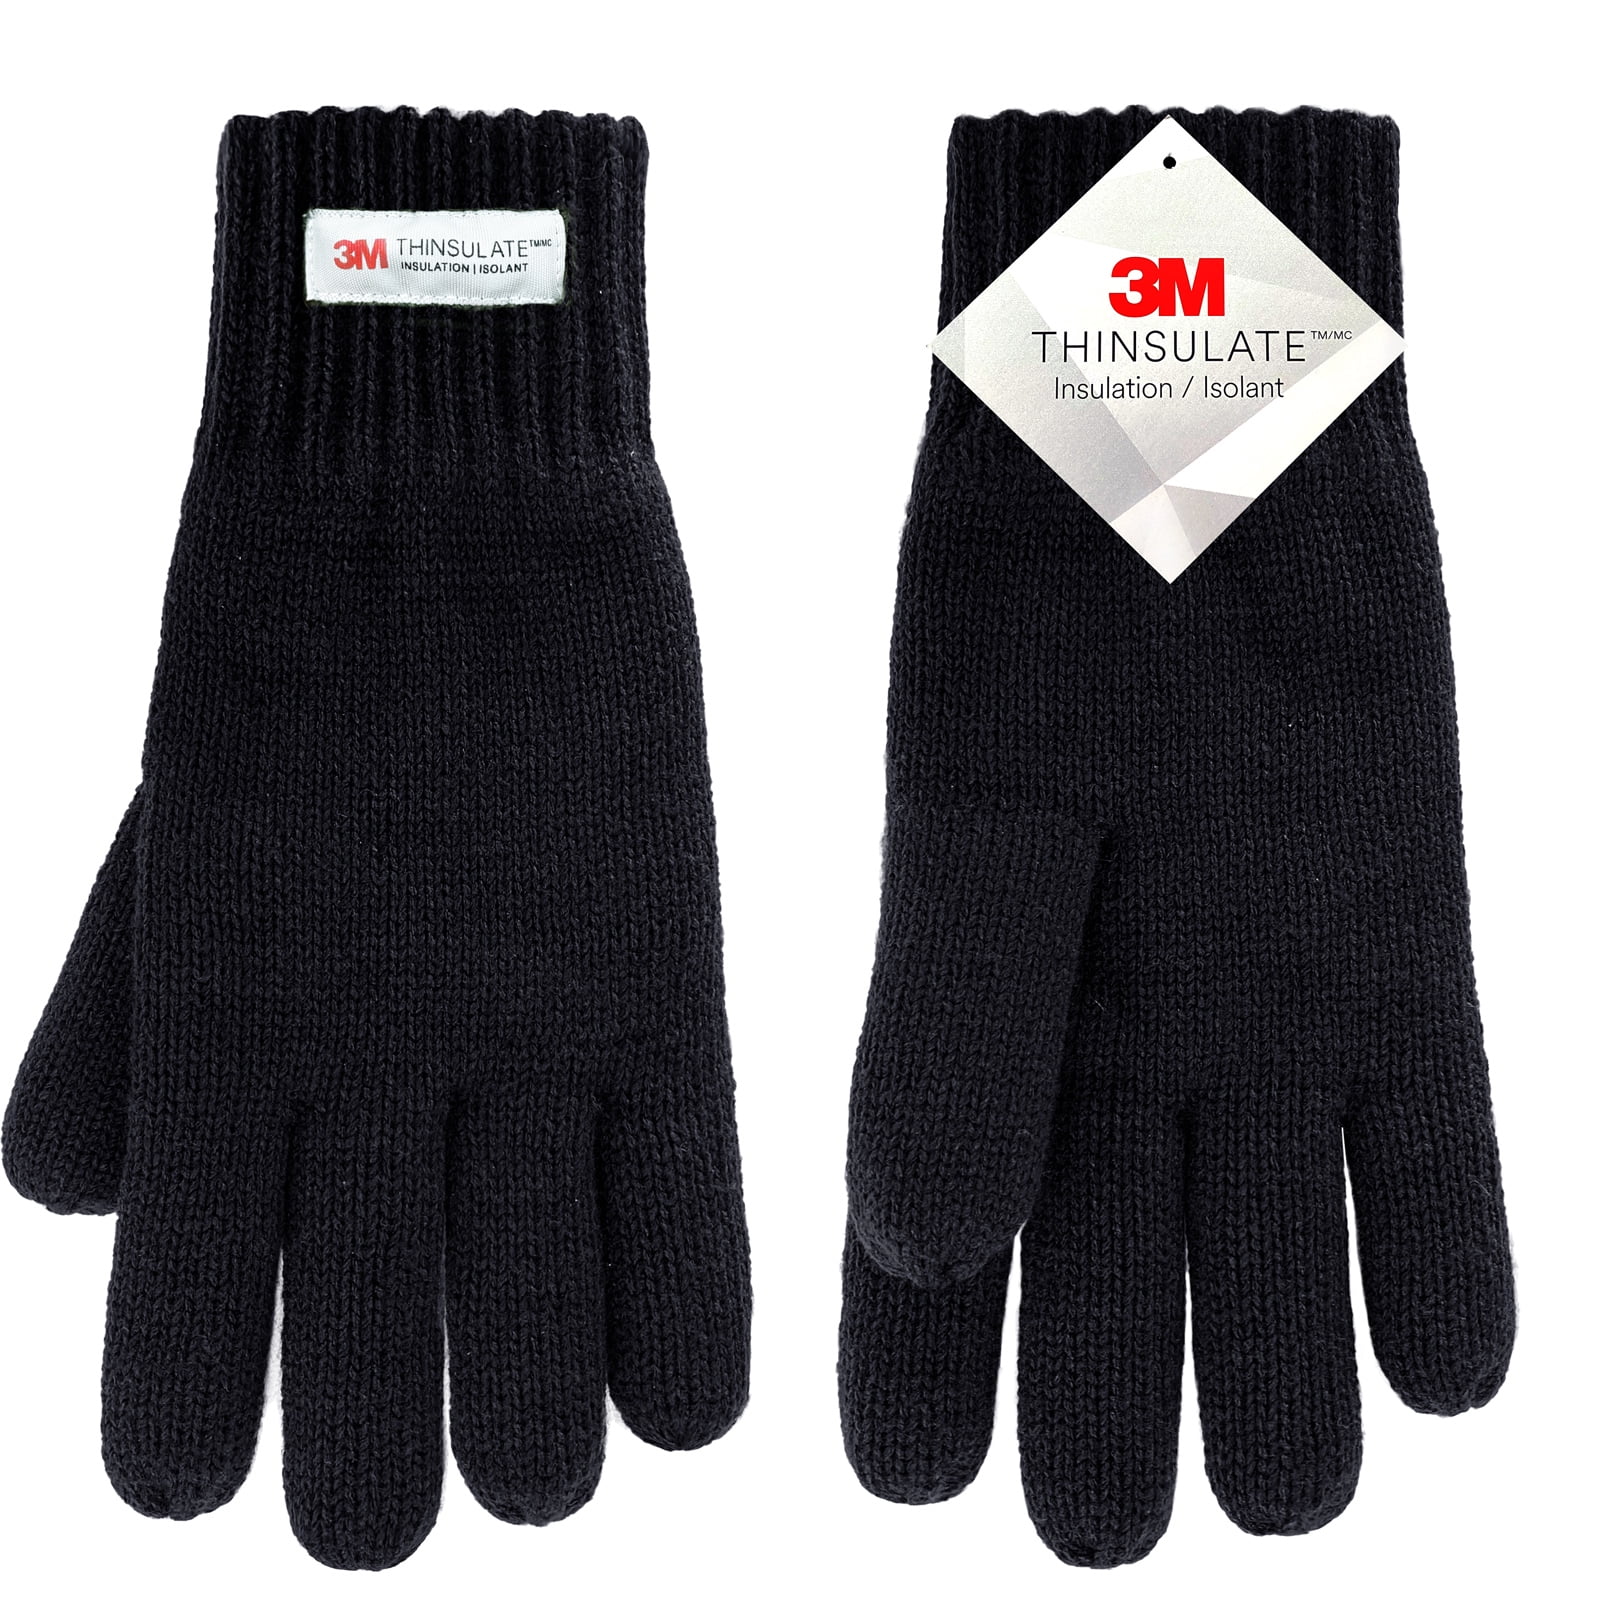 NEW MEN WOMEN EXTRA WARM WINTER THINSULATE THERMAL 3M QUALITY FINGERLESS GLOVES 